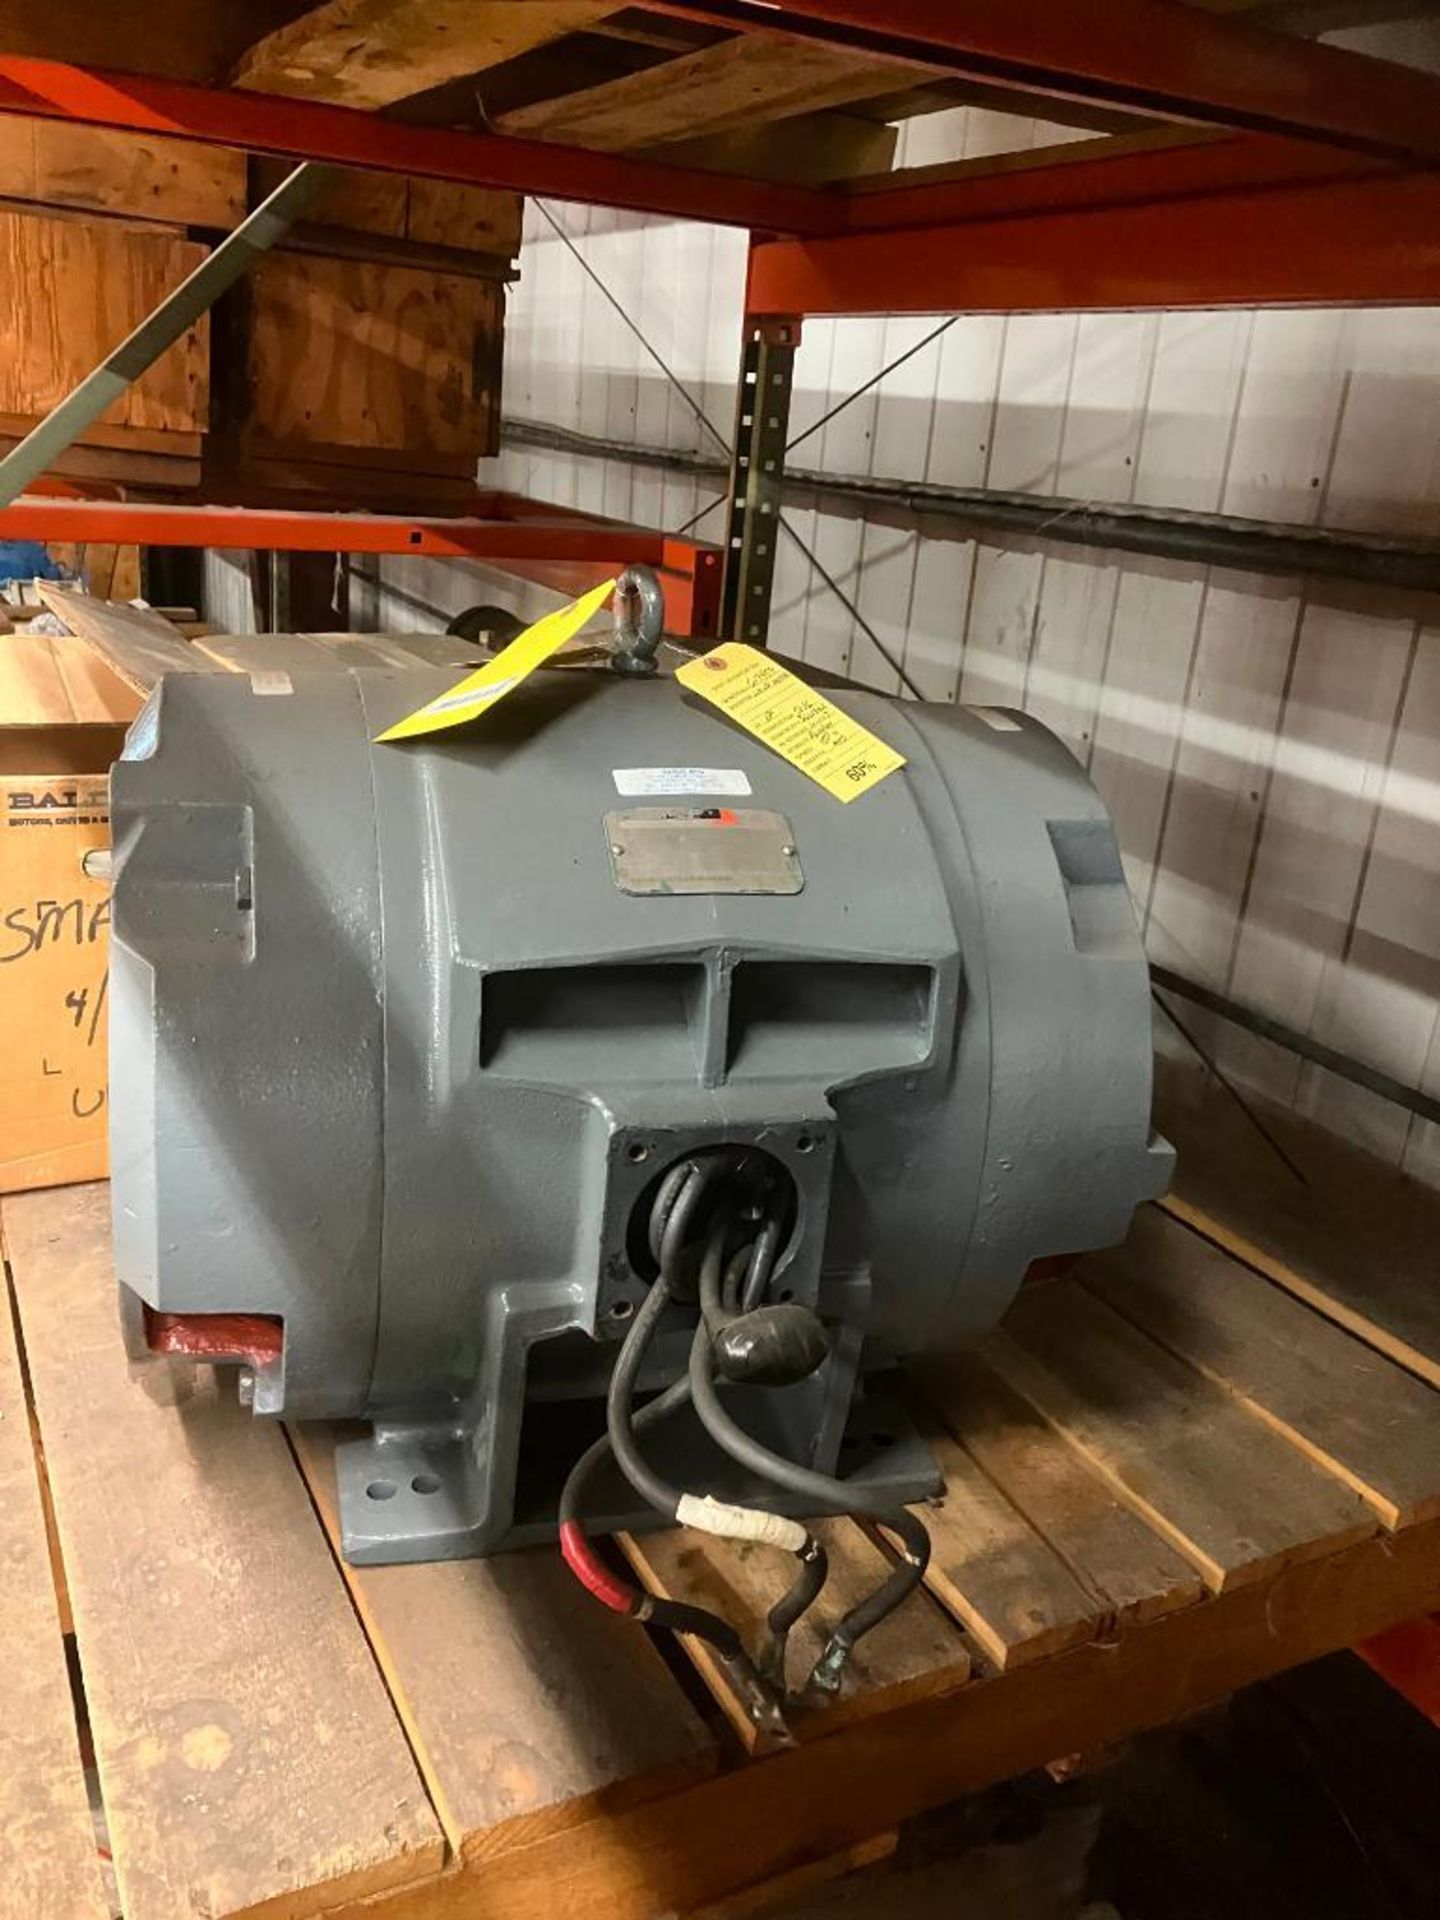 RELIANCE 100 HP ELECTRIC MOTOR, 355TS FRAME, 3,550 RPM, 230/460 V., 3 PHASE - Image 2 of 2